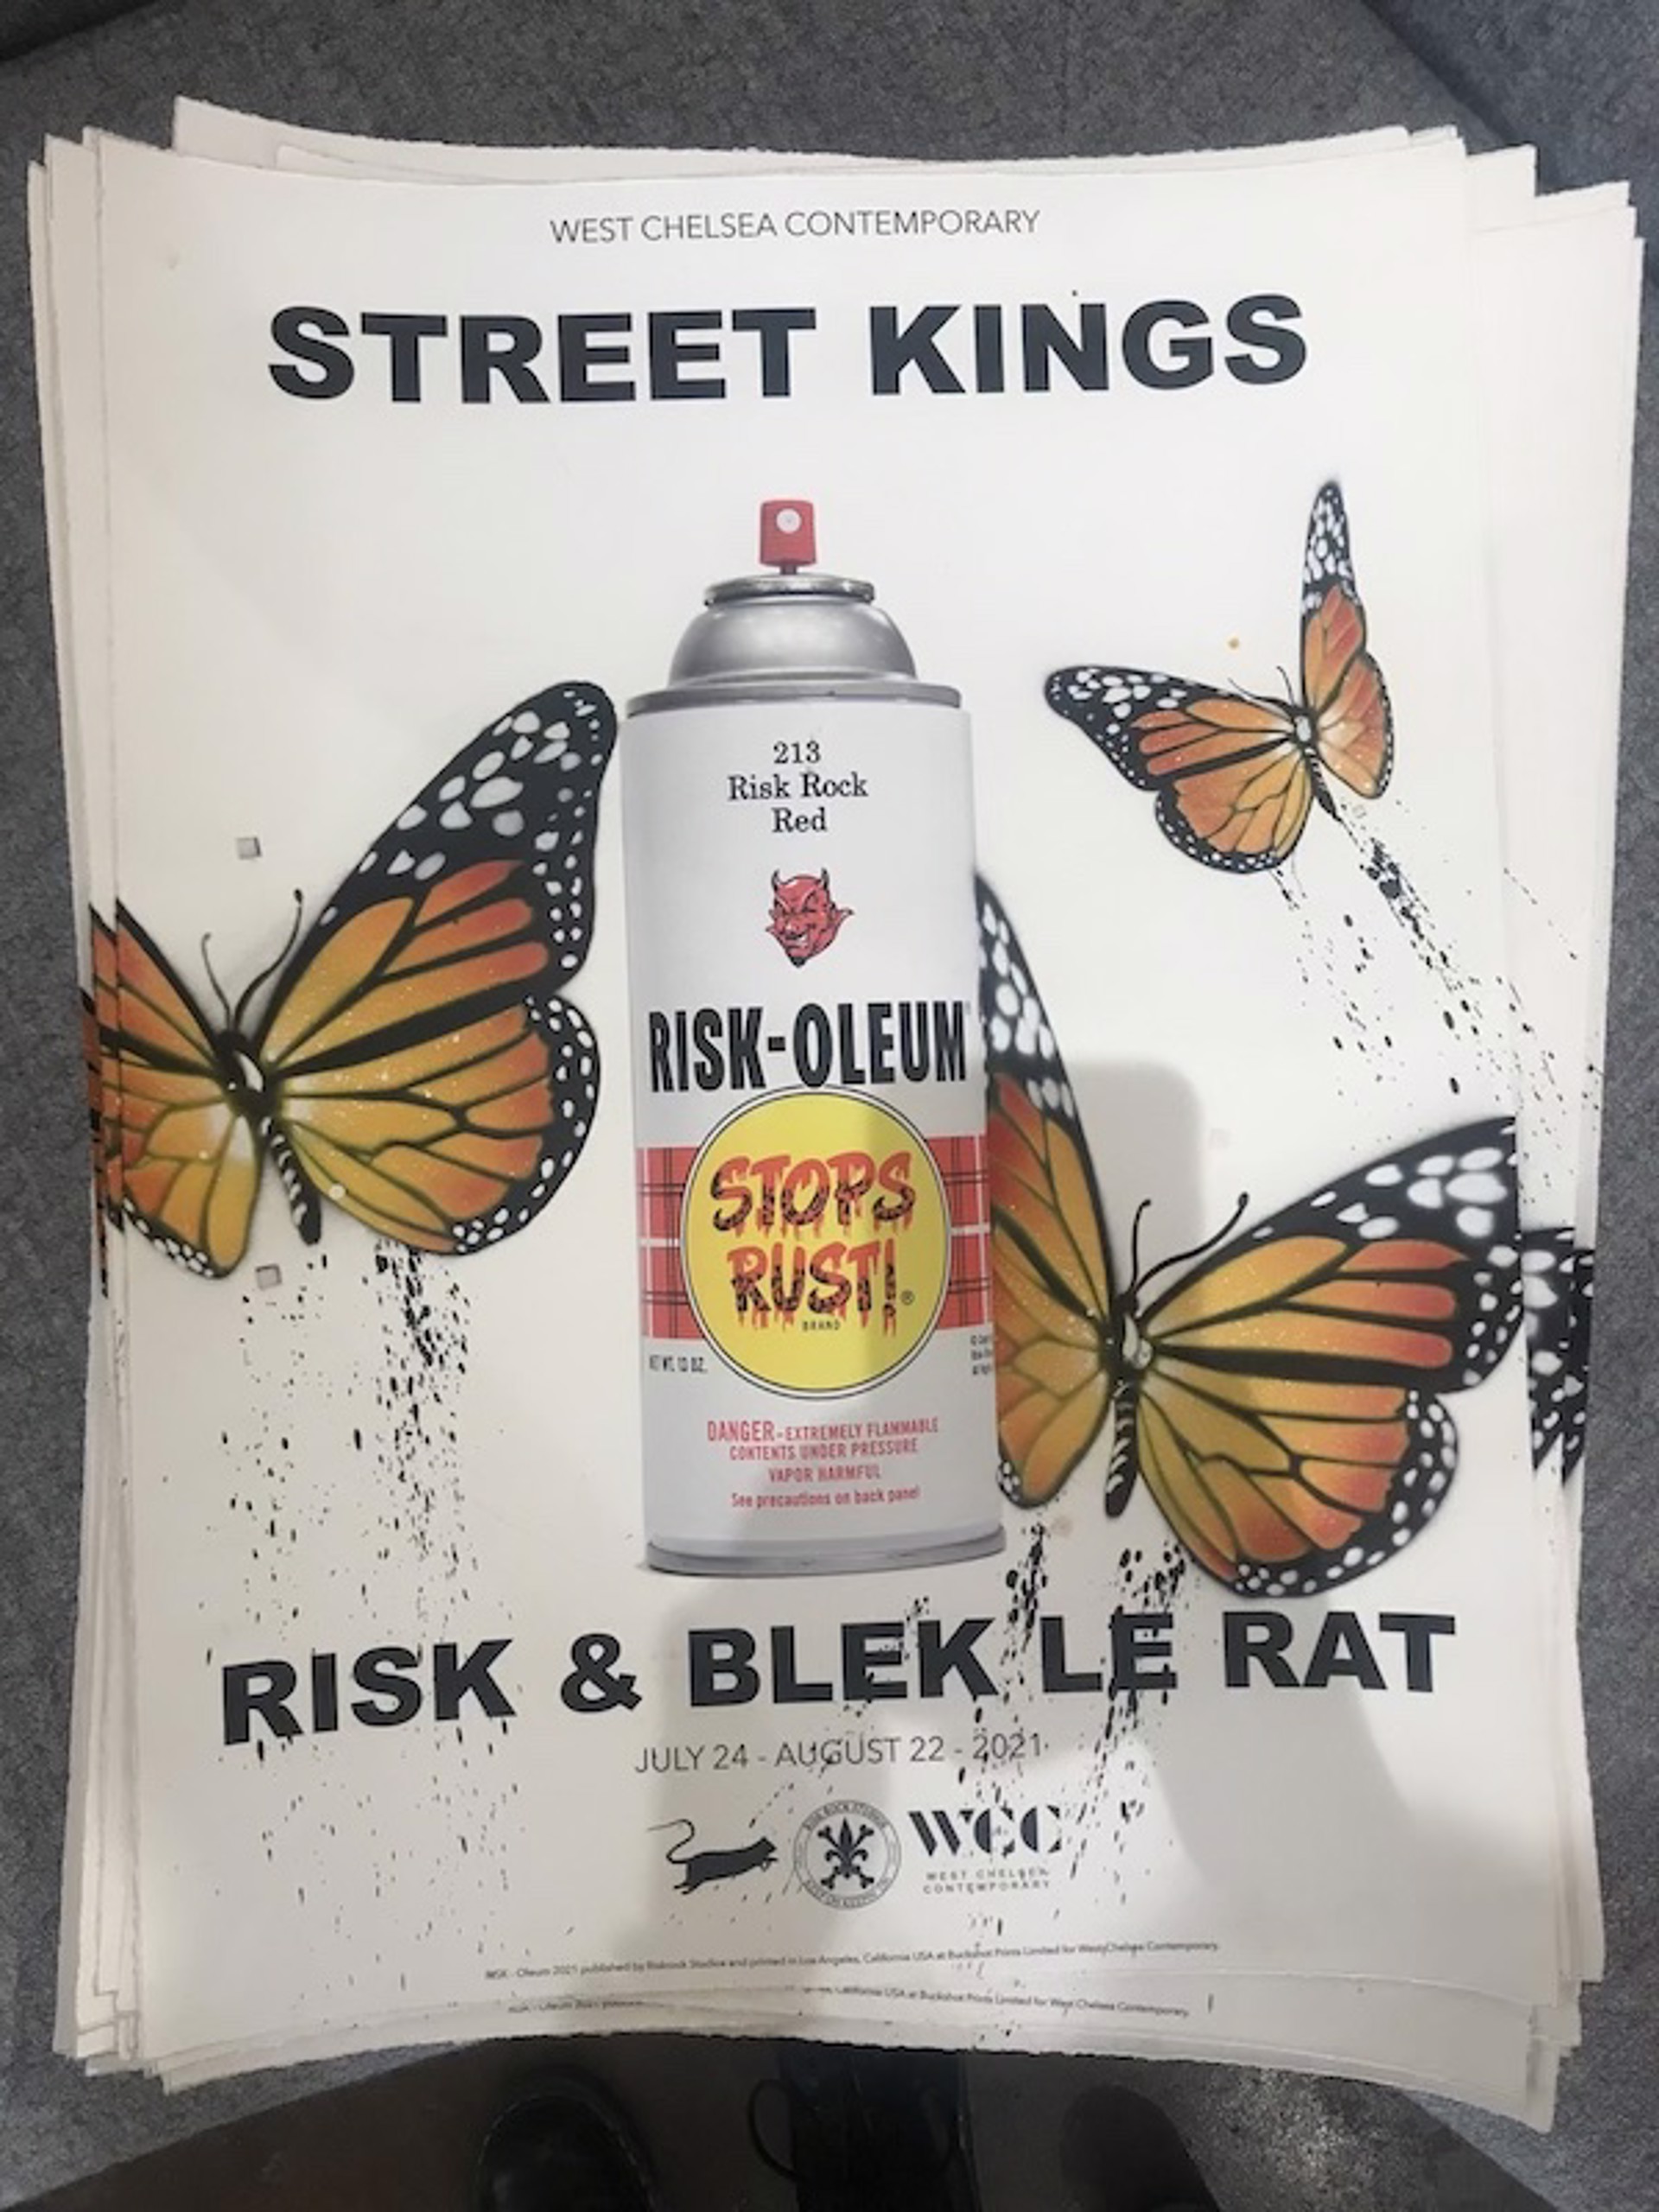 Street Kings Show Print (30/50) by Risk